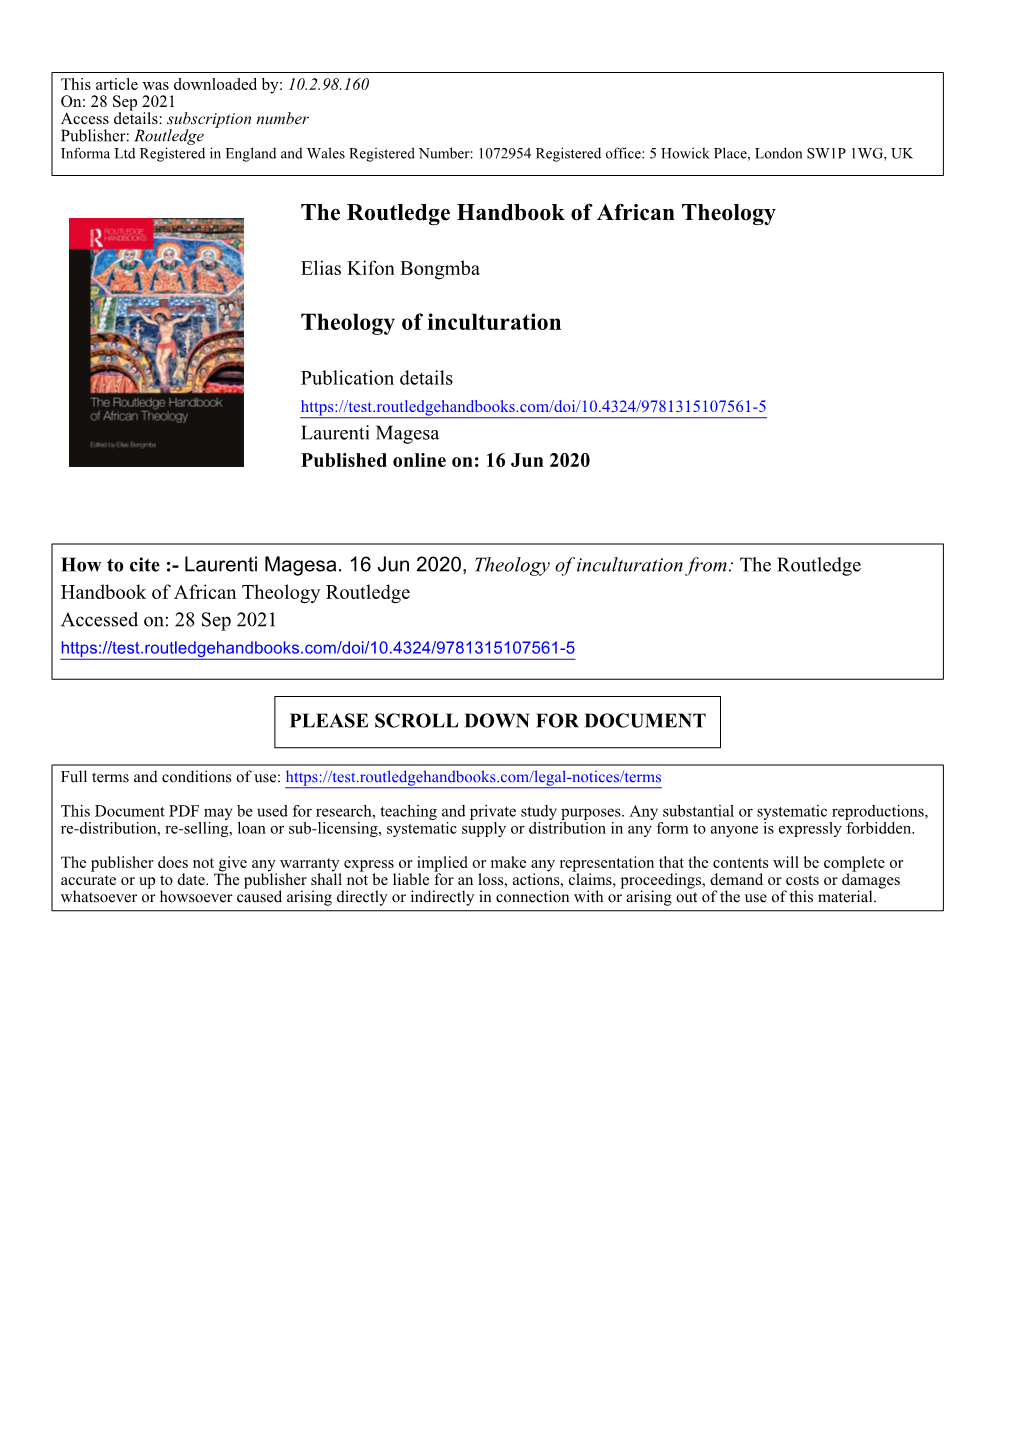 The Routledge Handbook of African Theology Theology of Inculturation